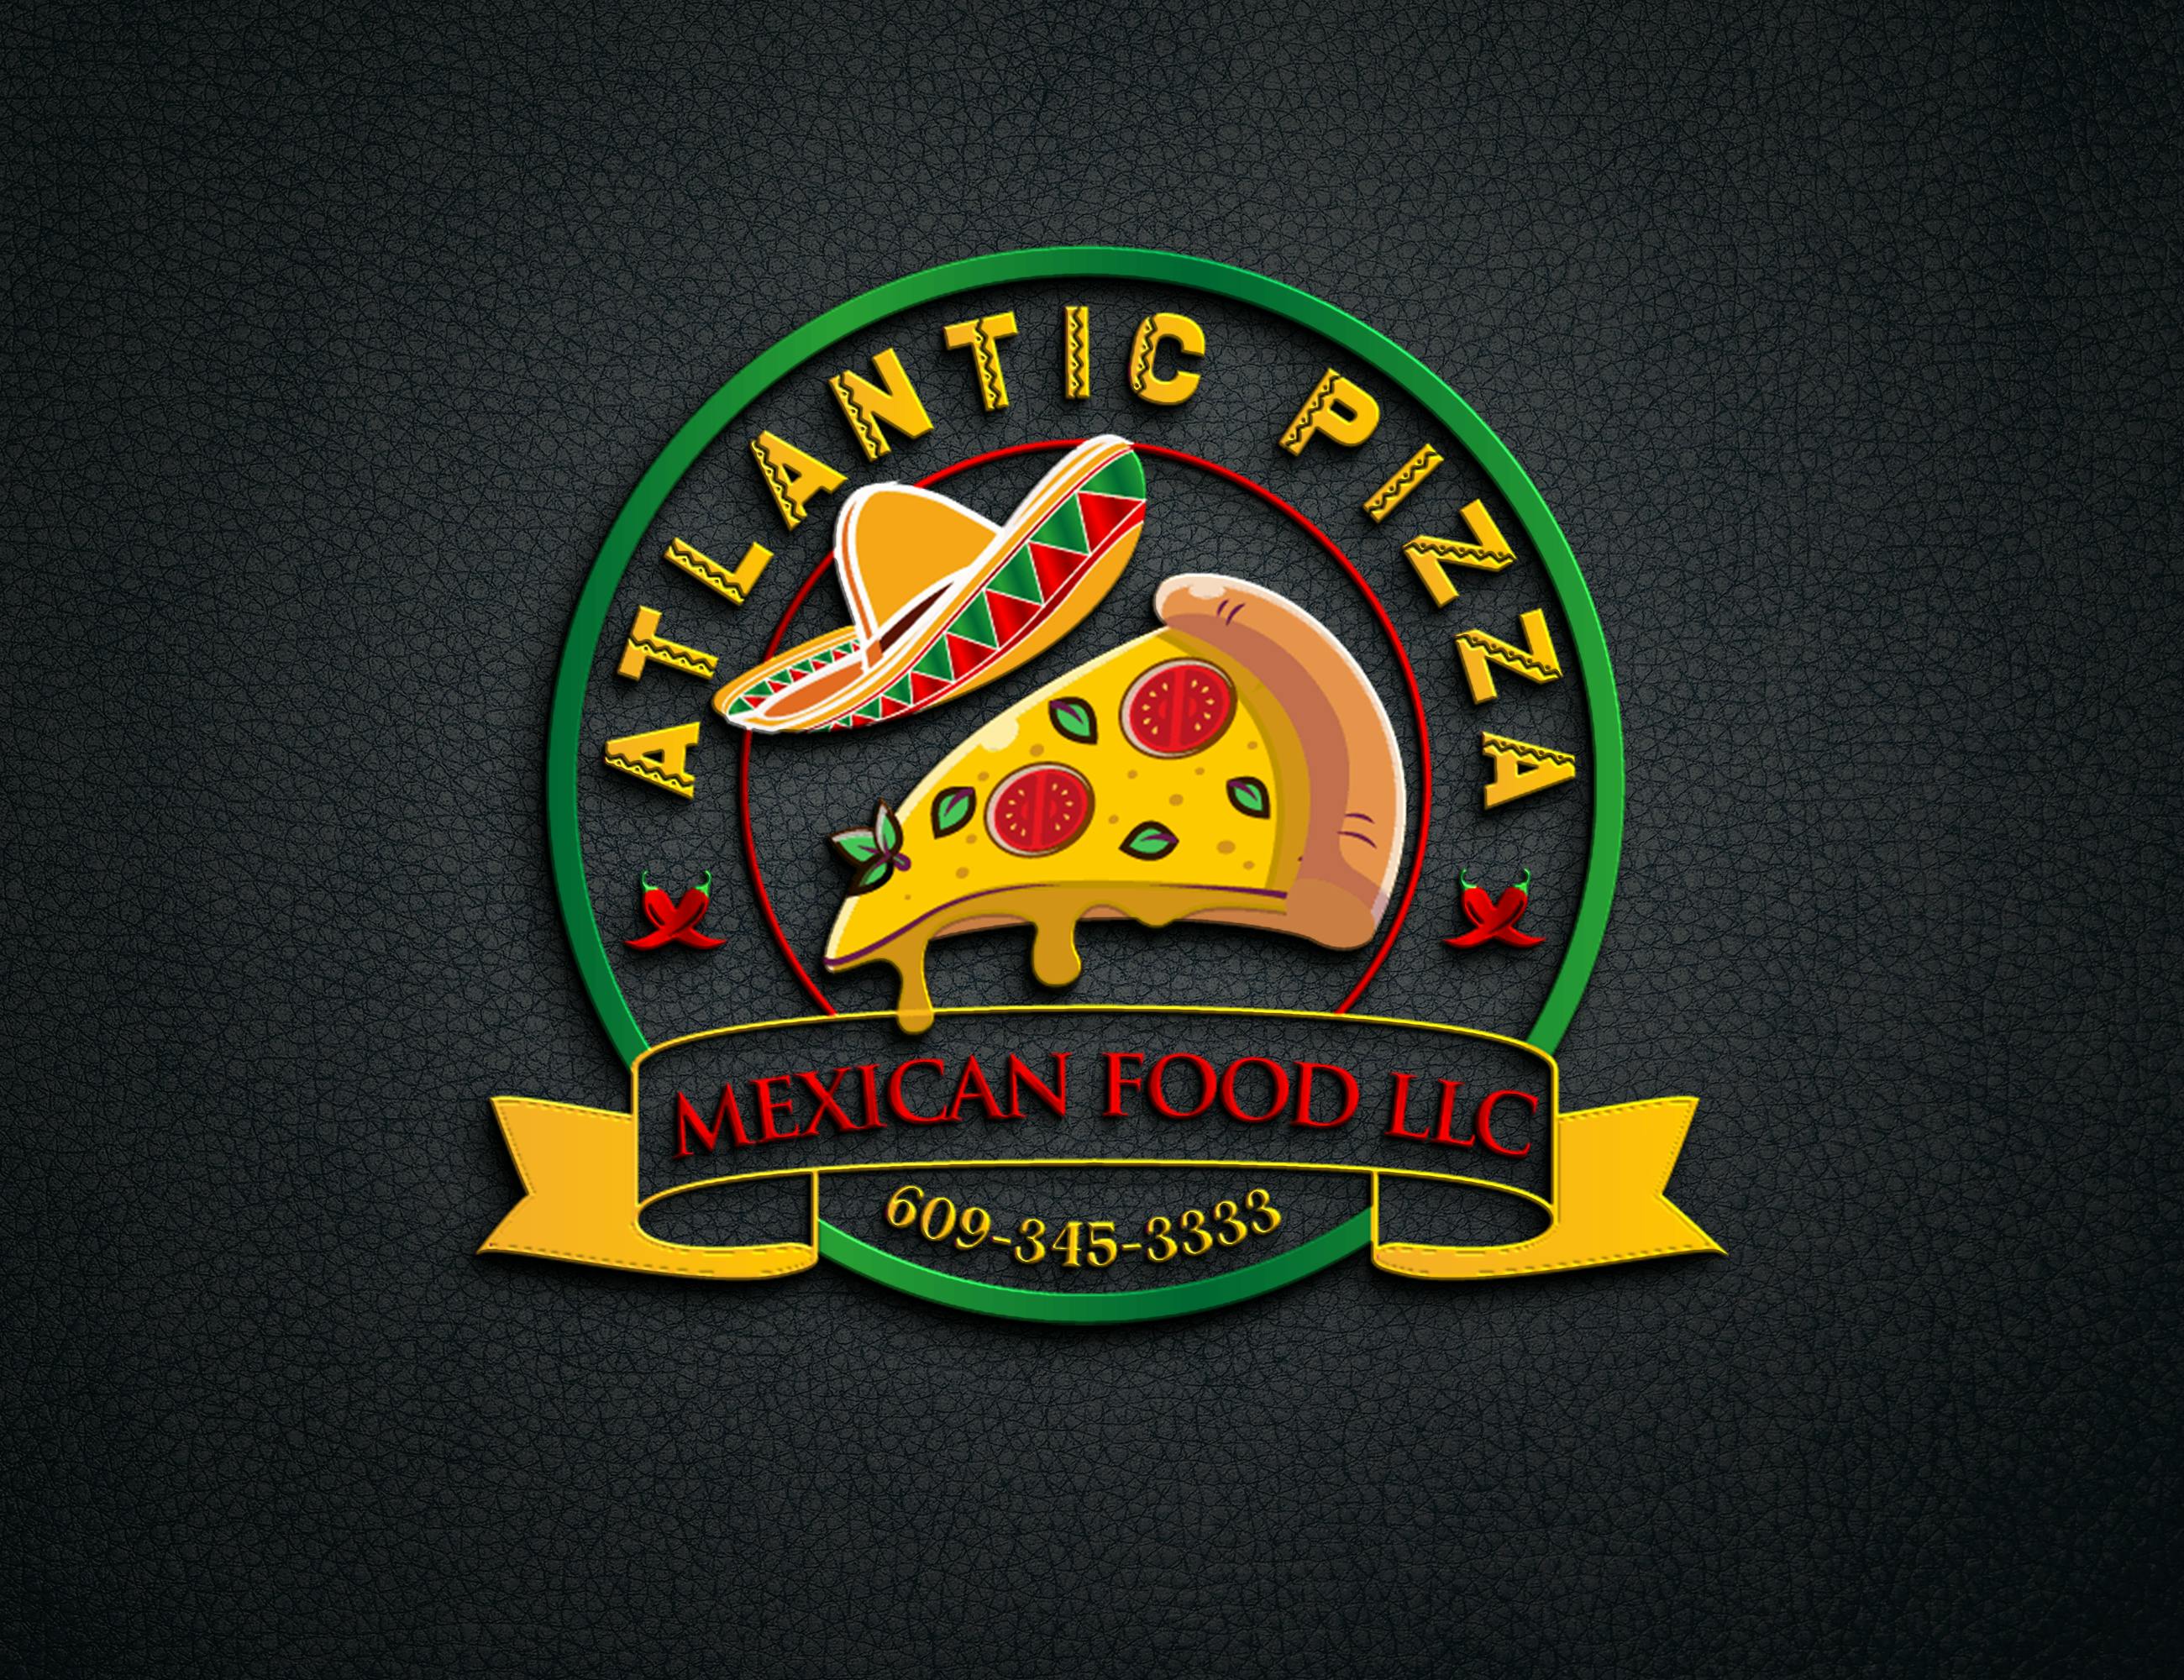 Atlantic Pizza & Authentic Mexican Food